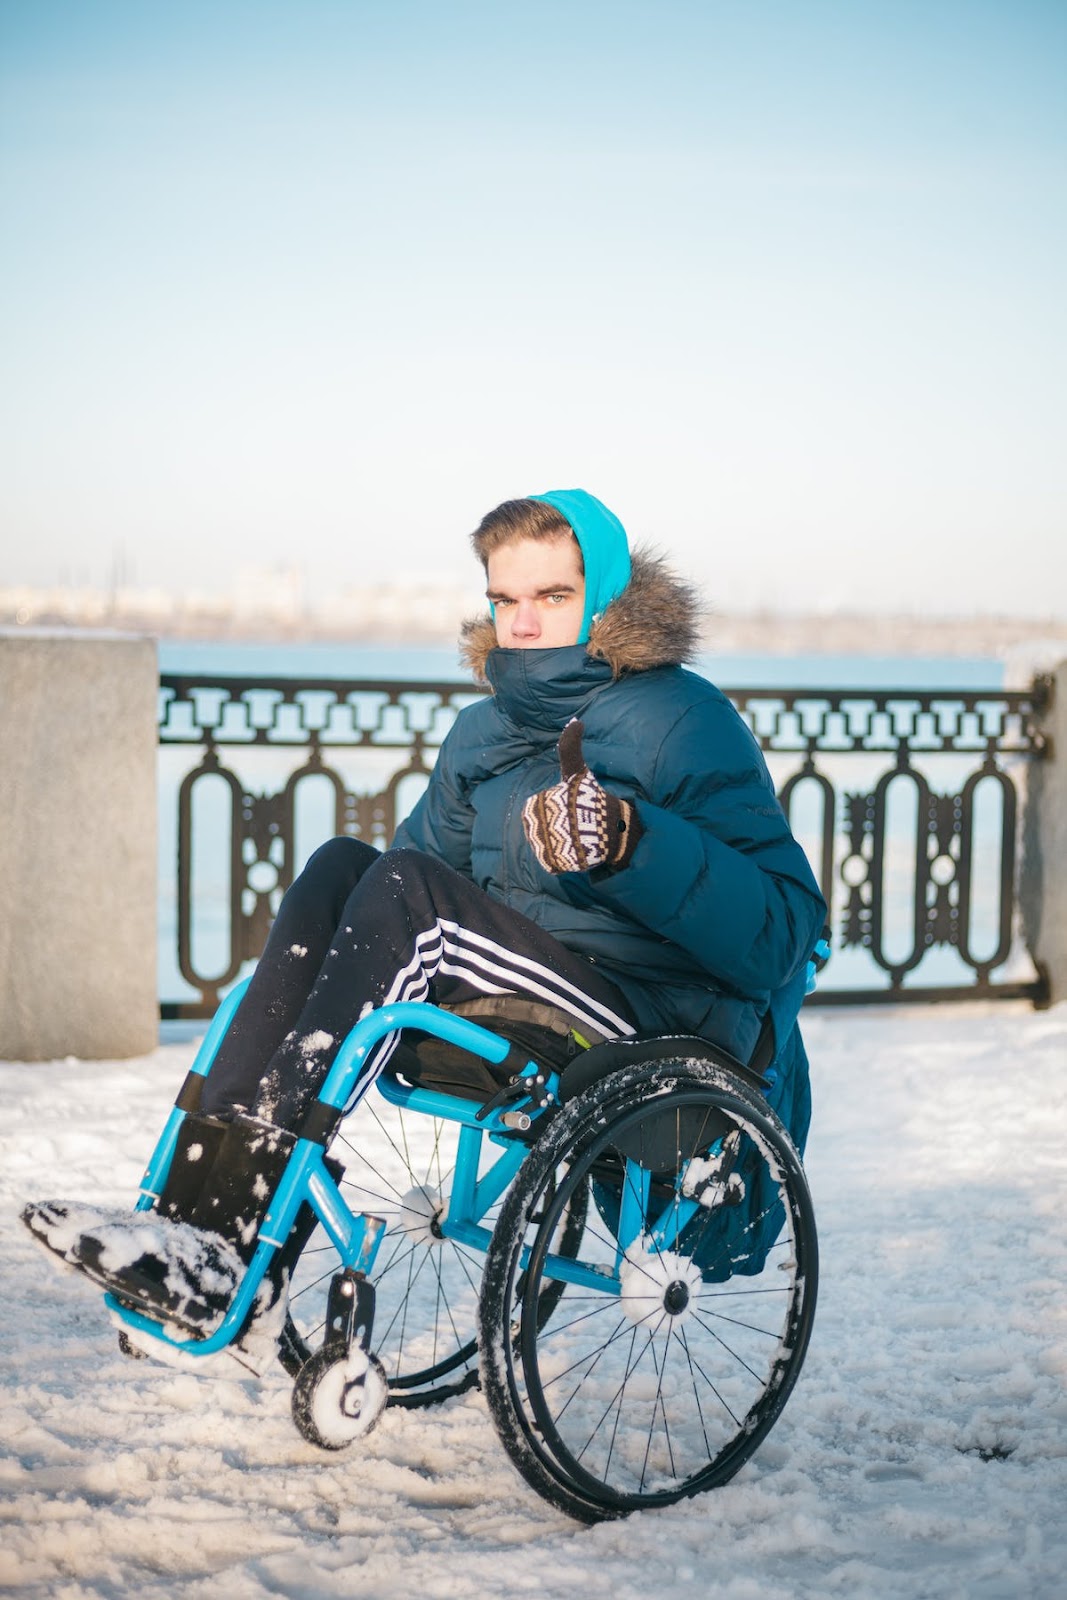 The Role of Fashion in Promoting Independence for People With Disabilities